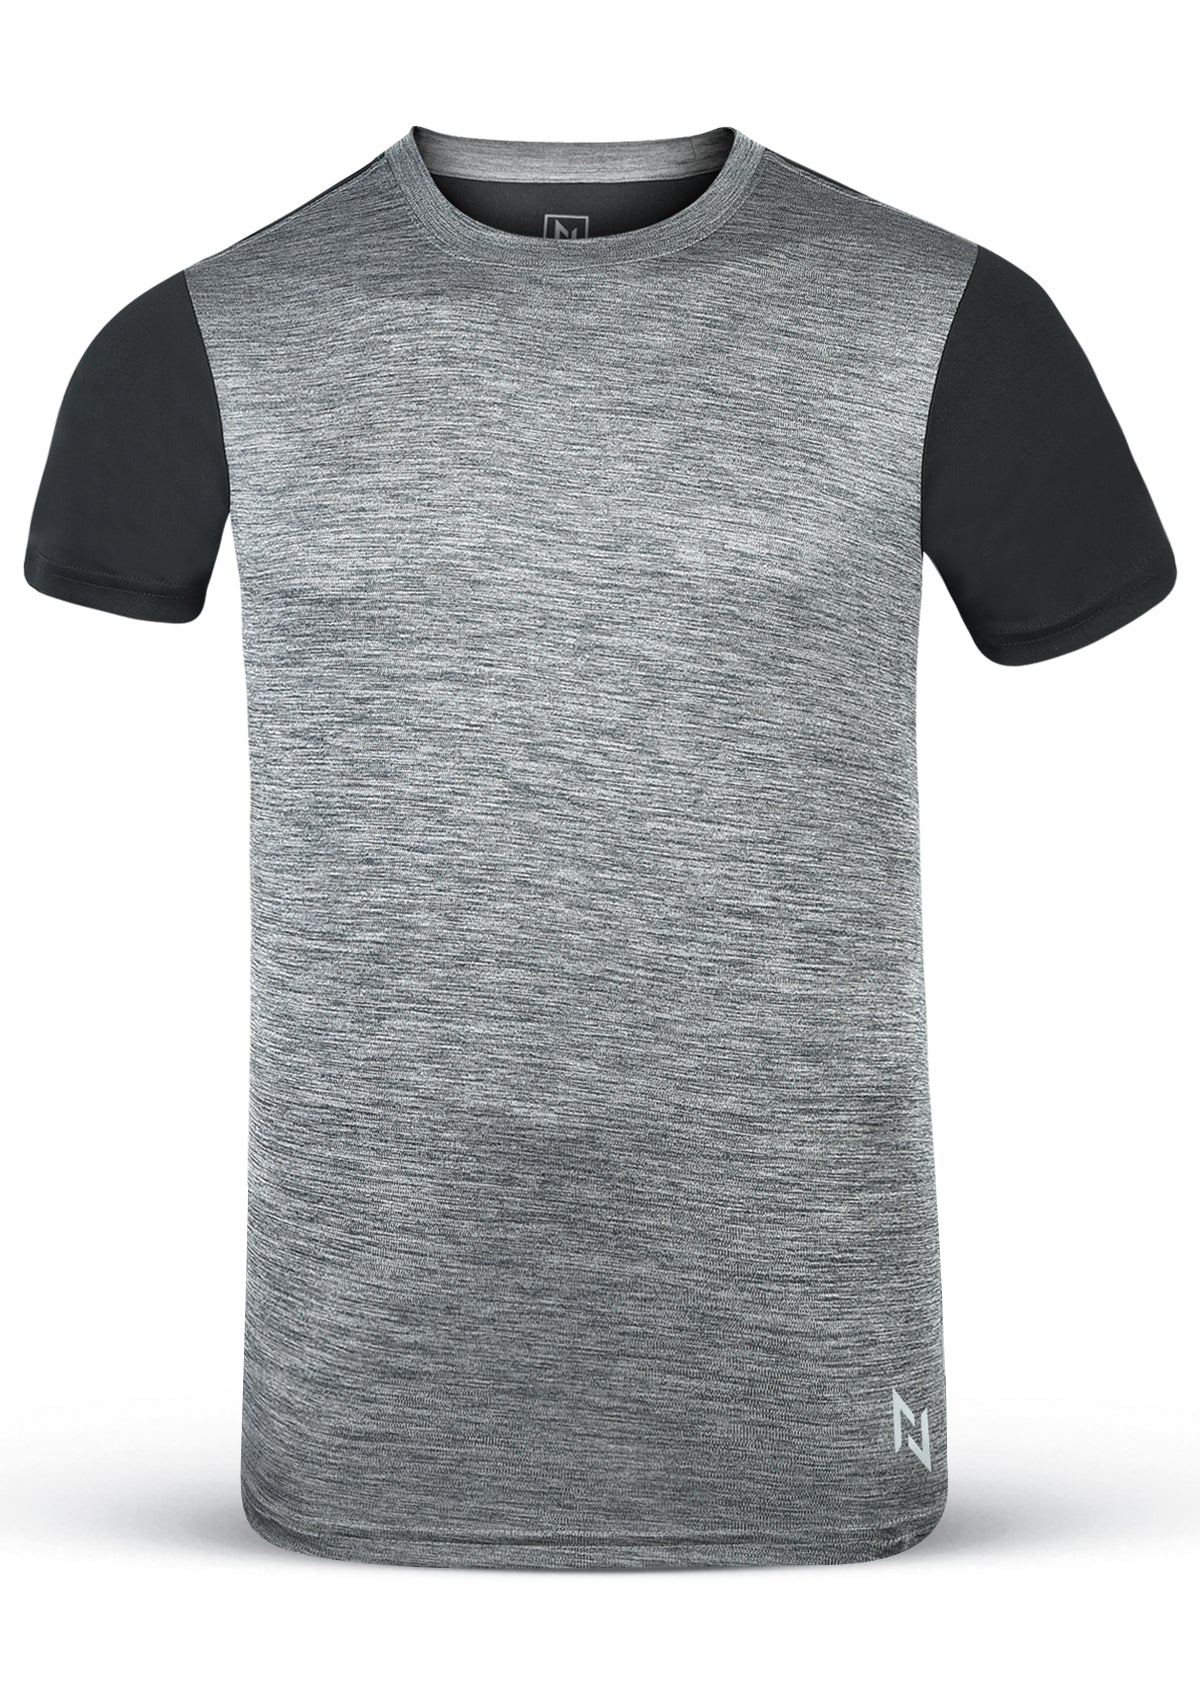 TRAINING TOP - GREY AND BLACK - Nomad Apparel